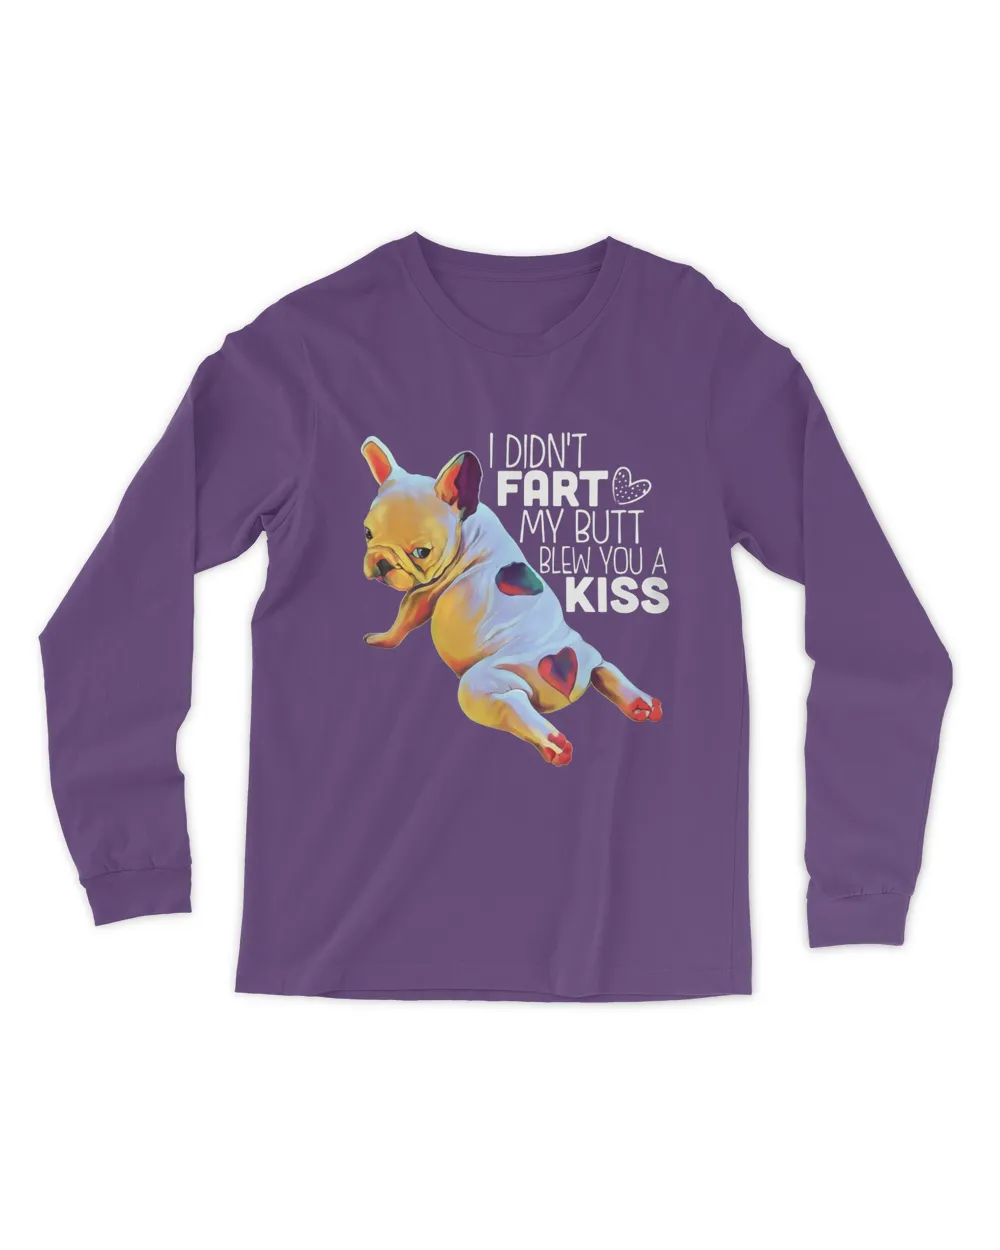 i did't fart my butt blew you a kiss